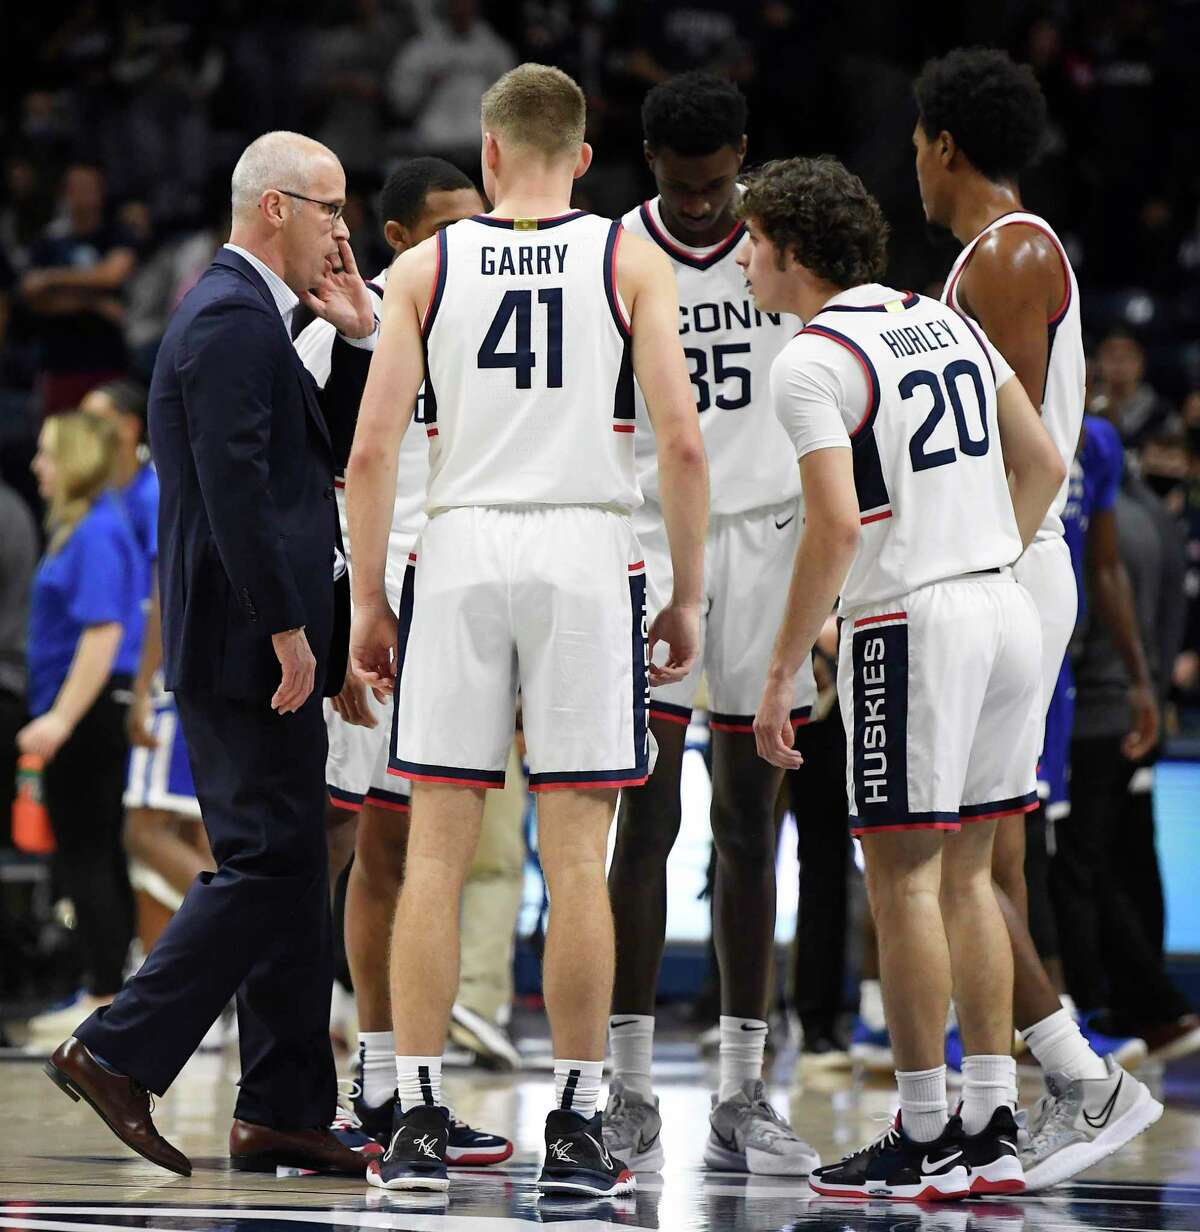 Connecticut head coach Dan Hurley, left, talks to players in a huddle including his son, Connecticut's Andrew Hurley (20) in the second half of an NCAA college basketball game, Tuesday, Nov. 9, 2021, in Storrs, Conn.